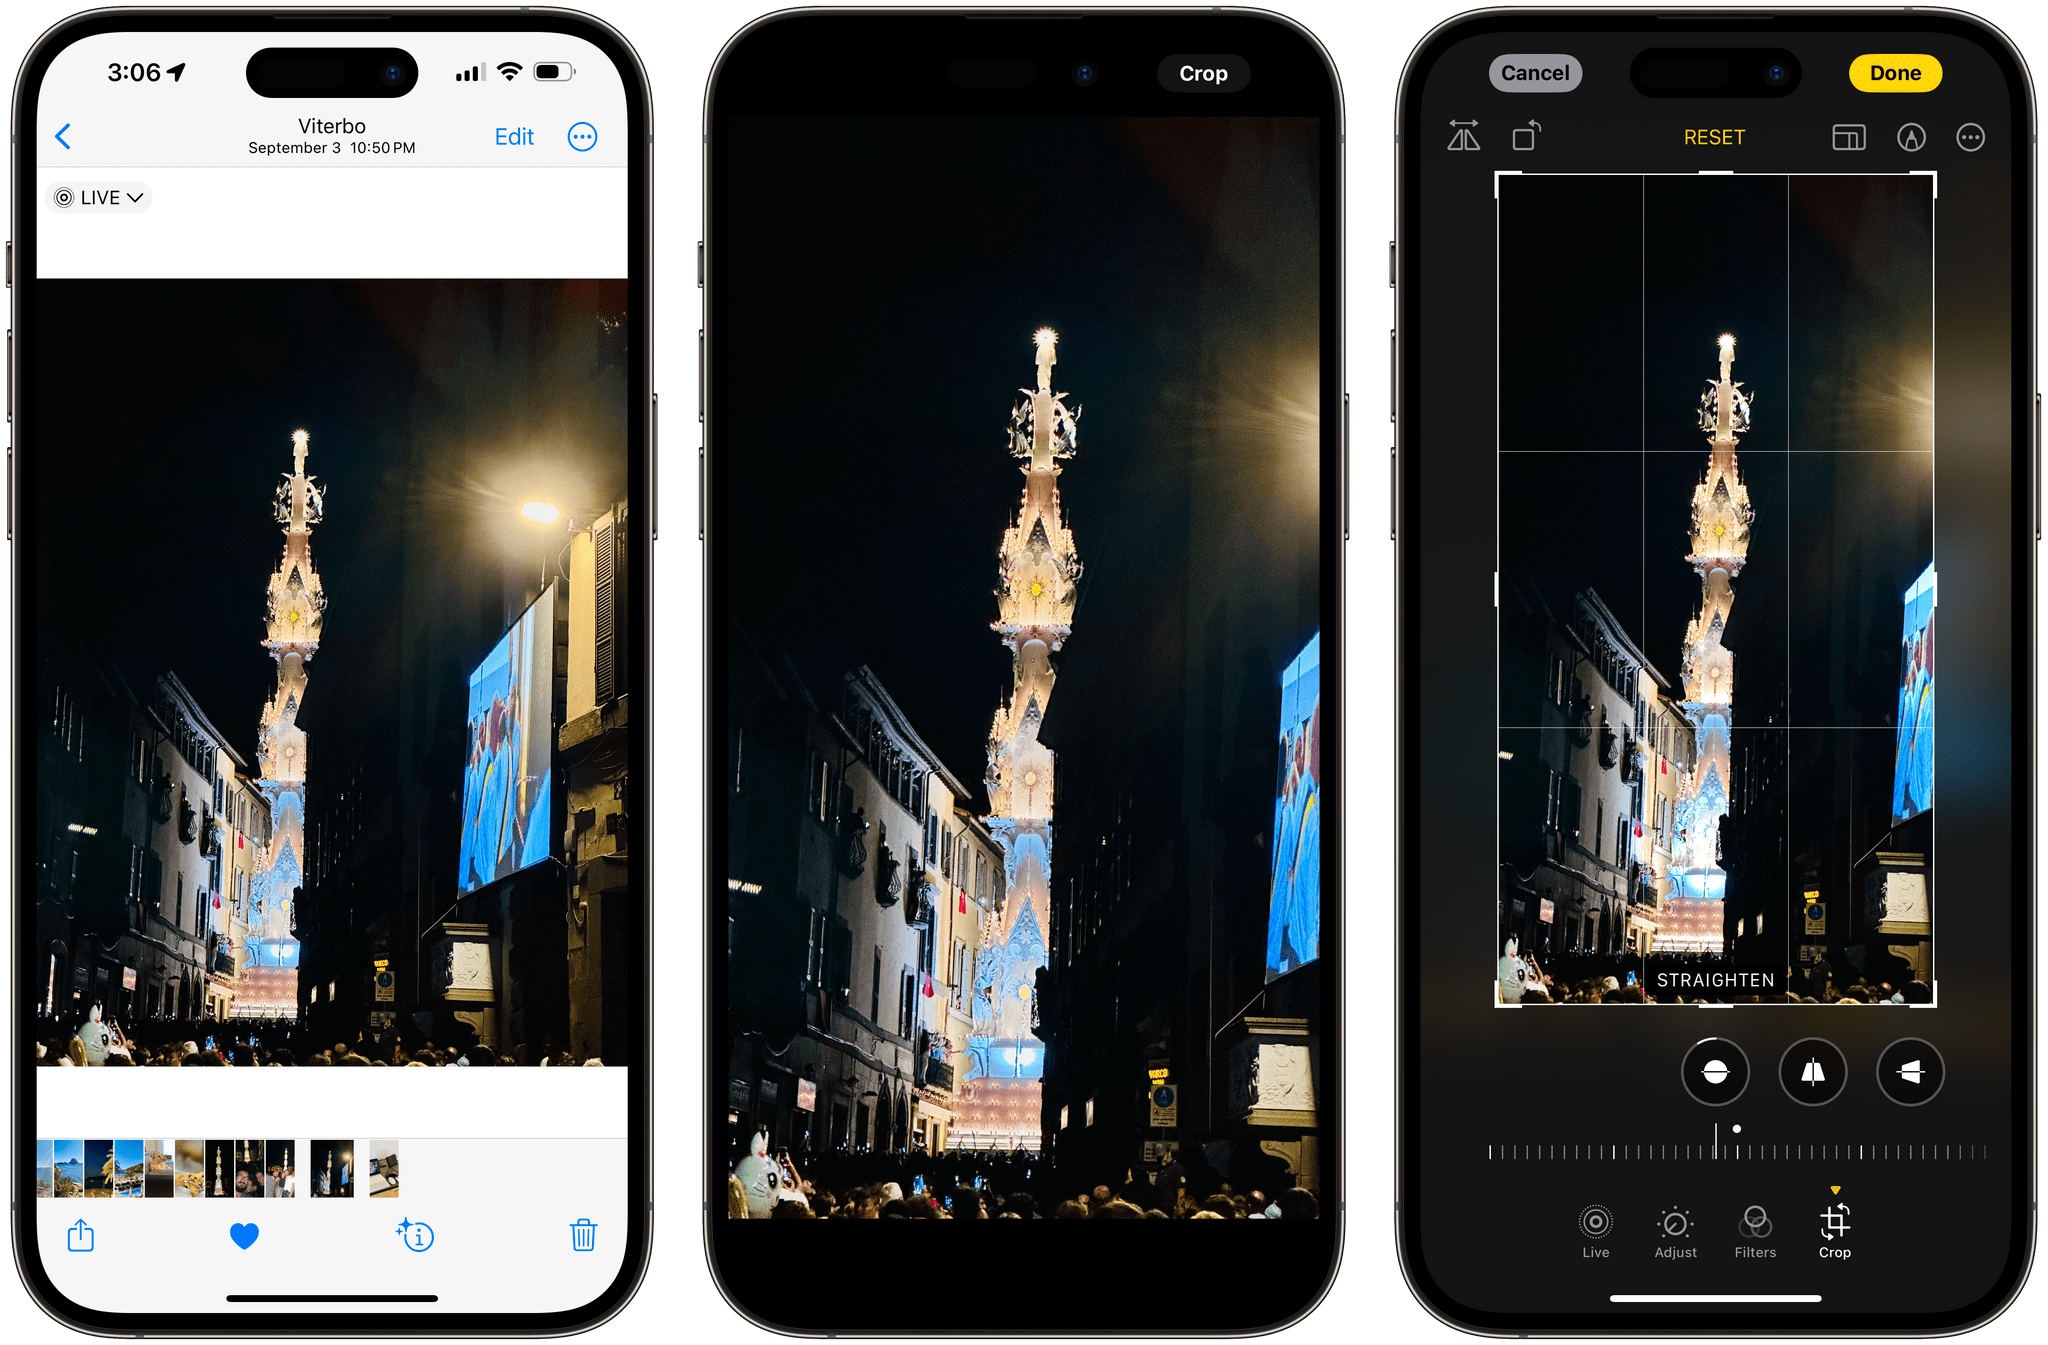 The faster crop flow in iOS 17. Just zoom in on a photo and press the 'Crop' button.